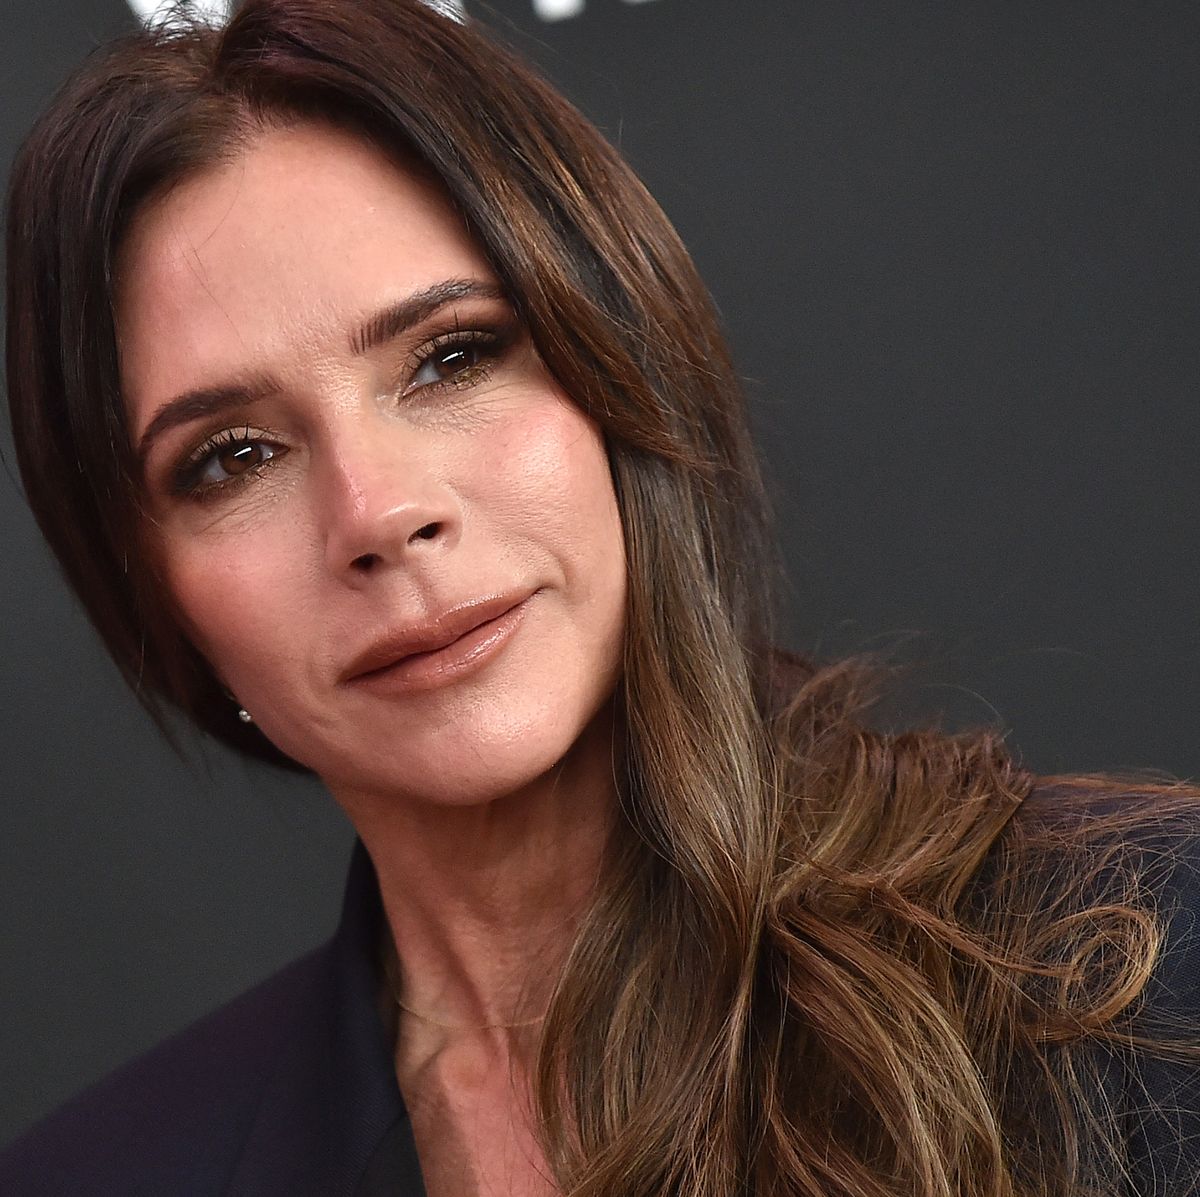 Victoria Beckham's Foot Injury: Everything To Know